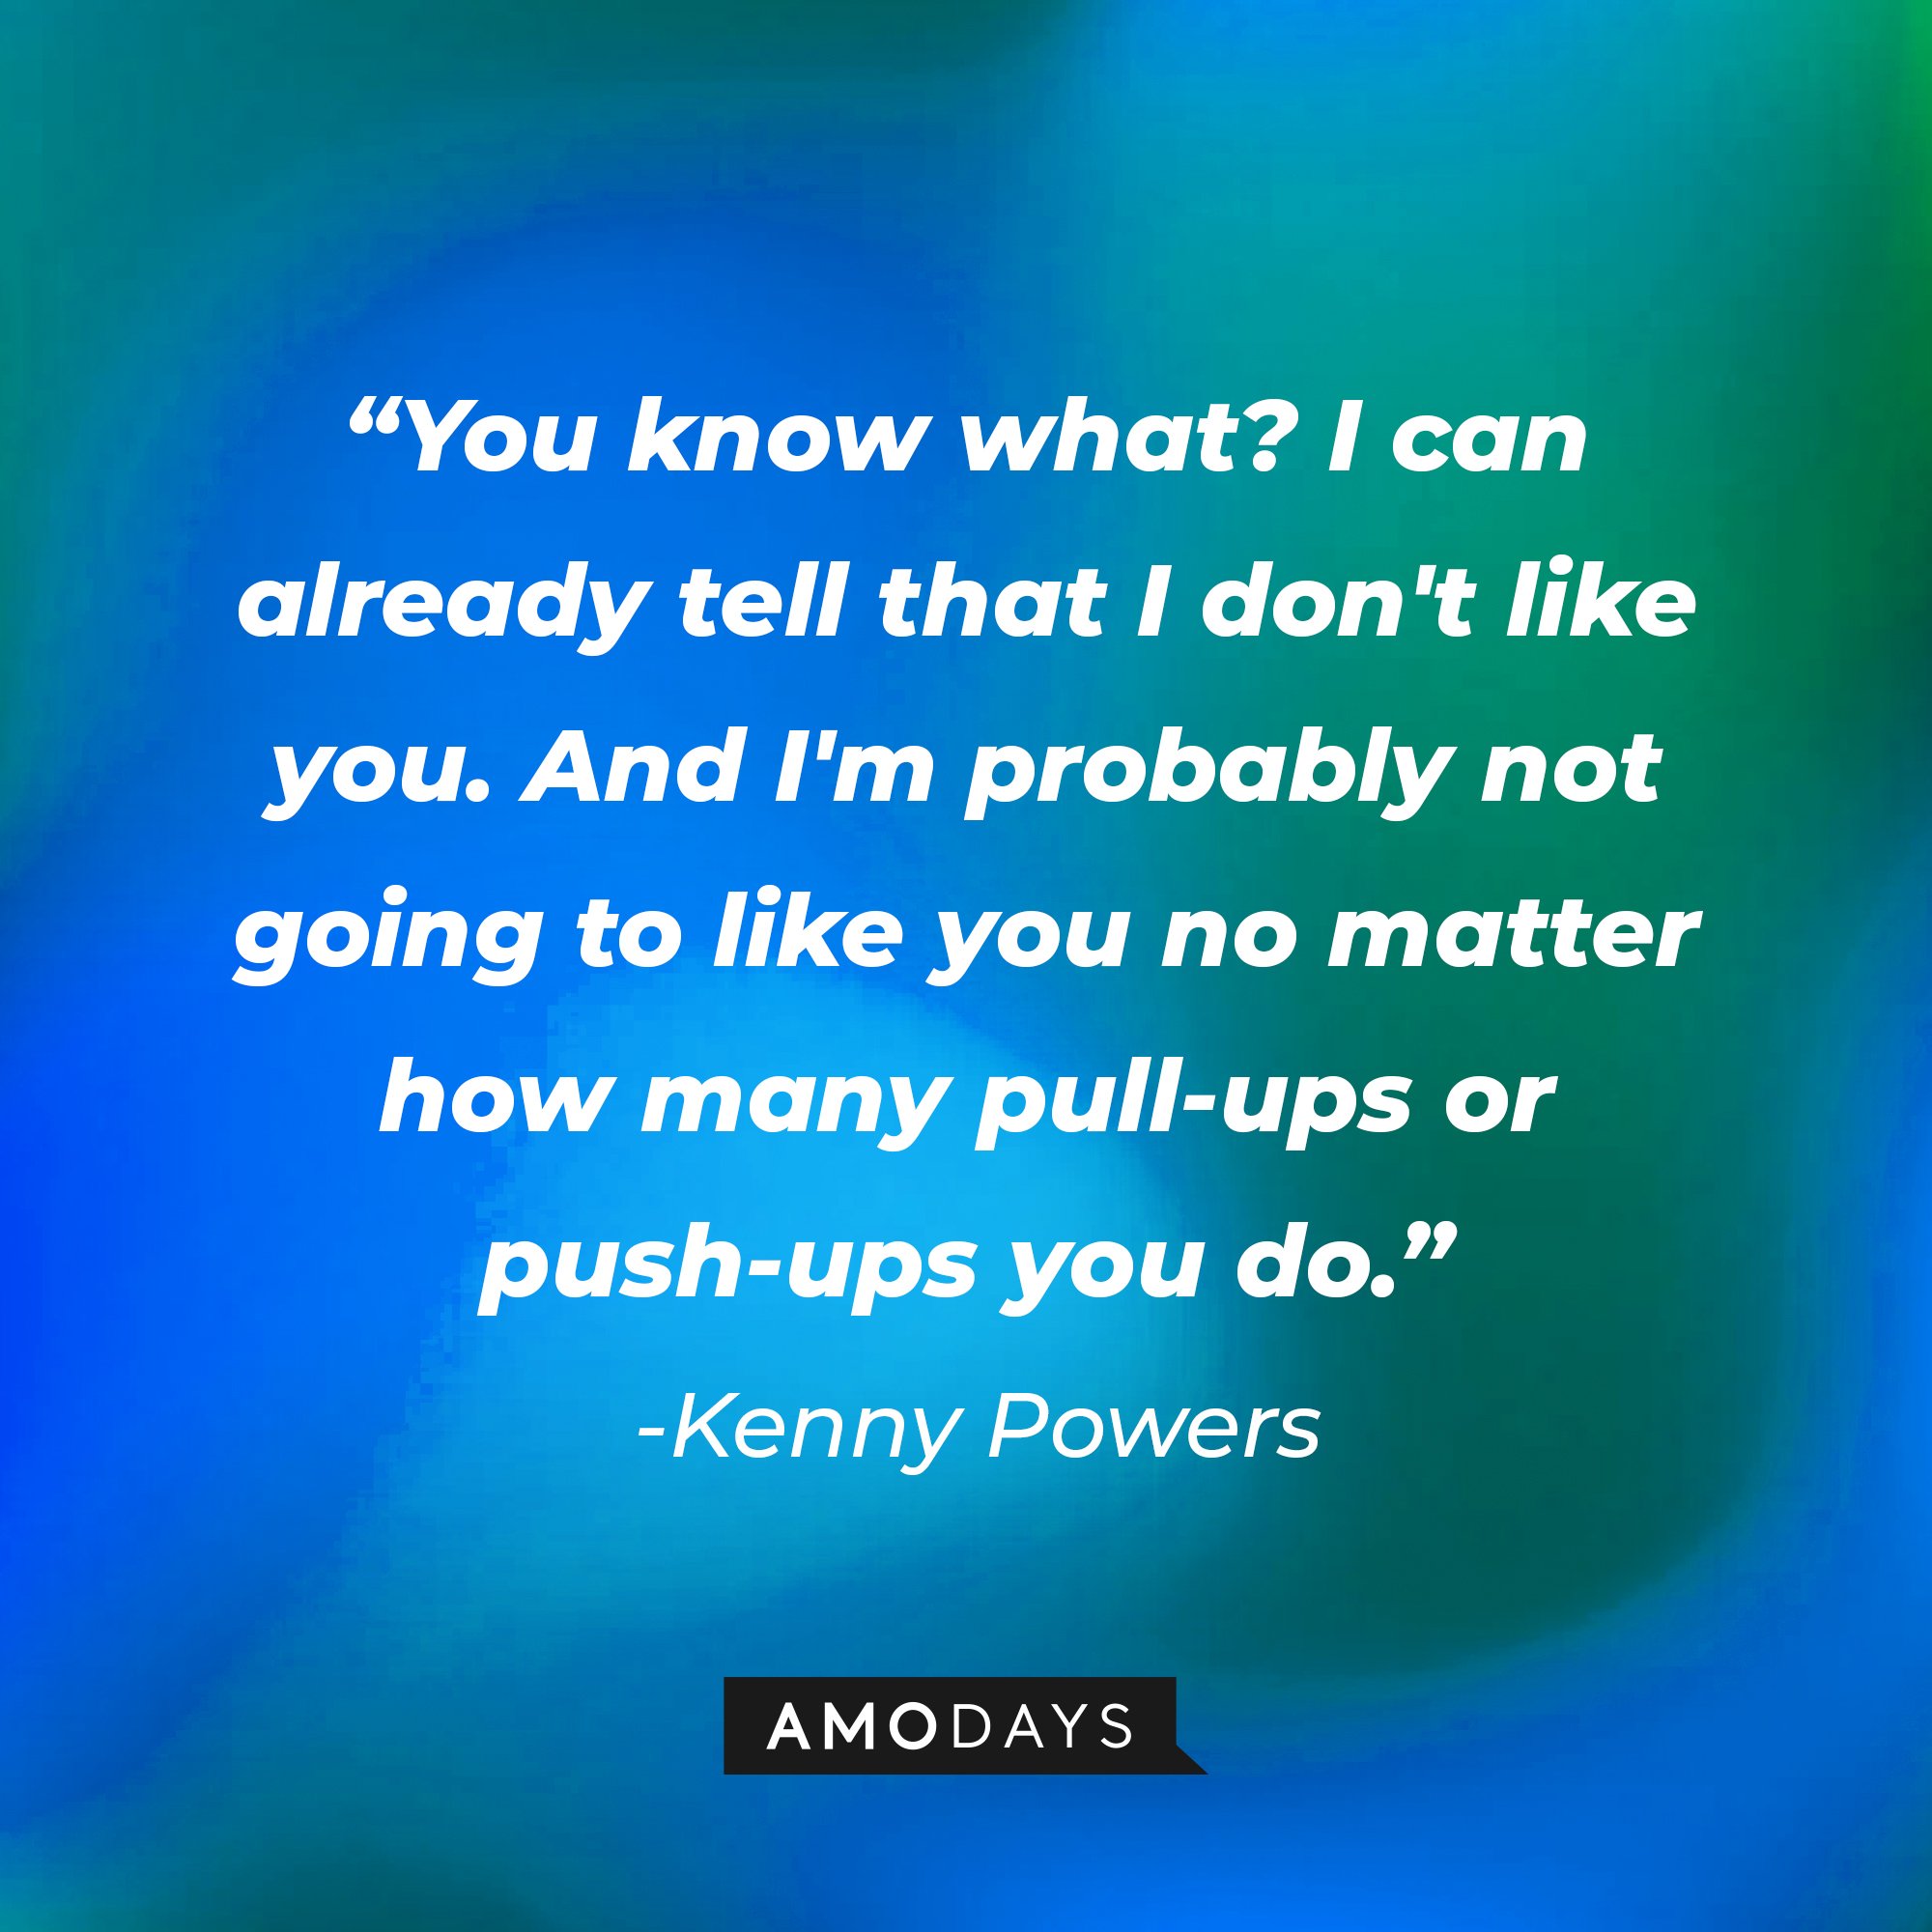 Kenny Powers' quote: "You know what? I can already tell that I don't like you. And I'm probably not going to like you no matter how many pull-ups or push-ups you do.” | Image: AmoDays